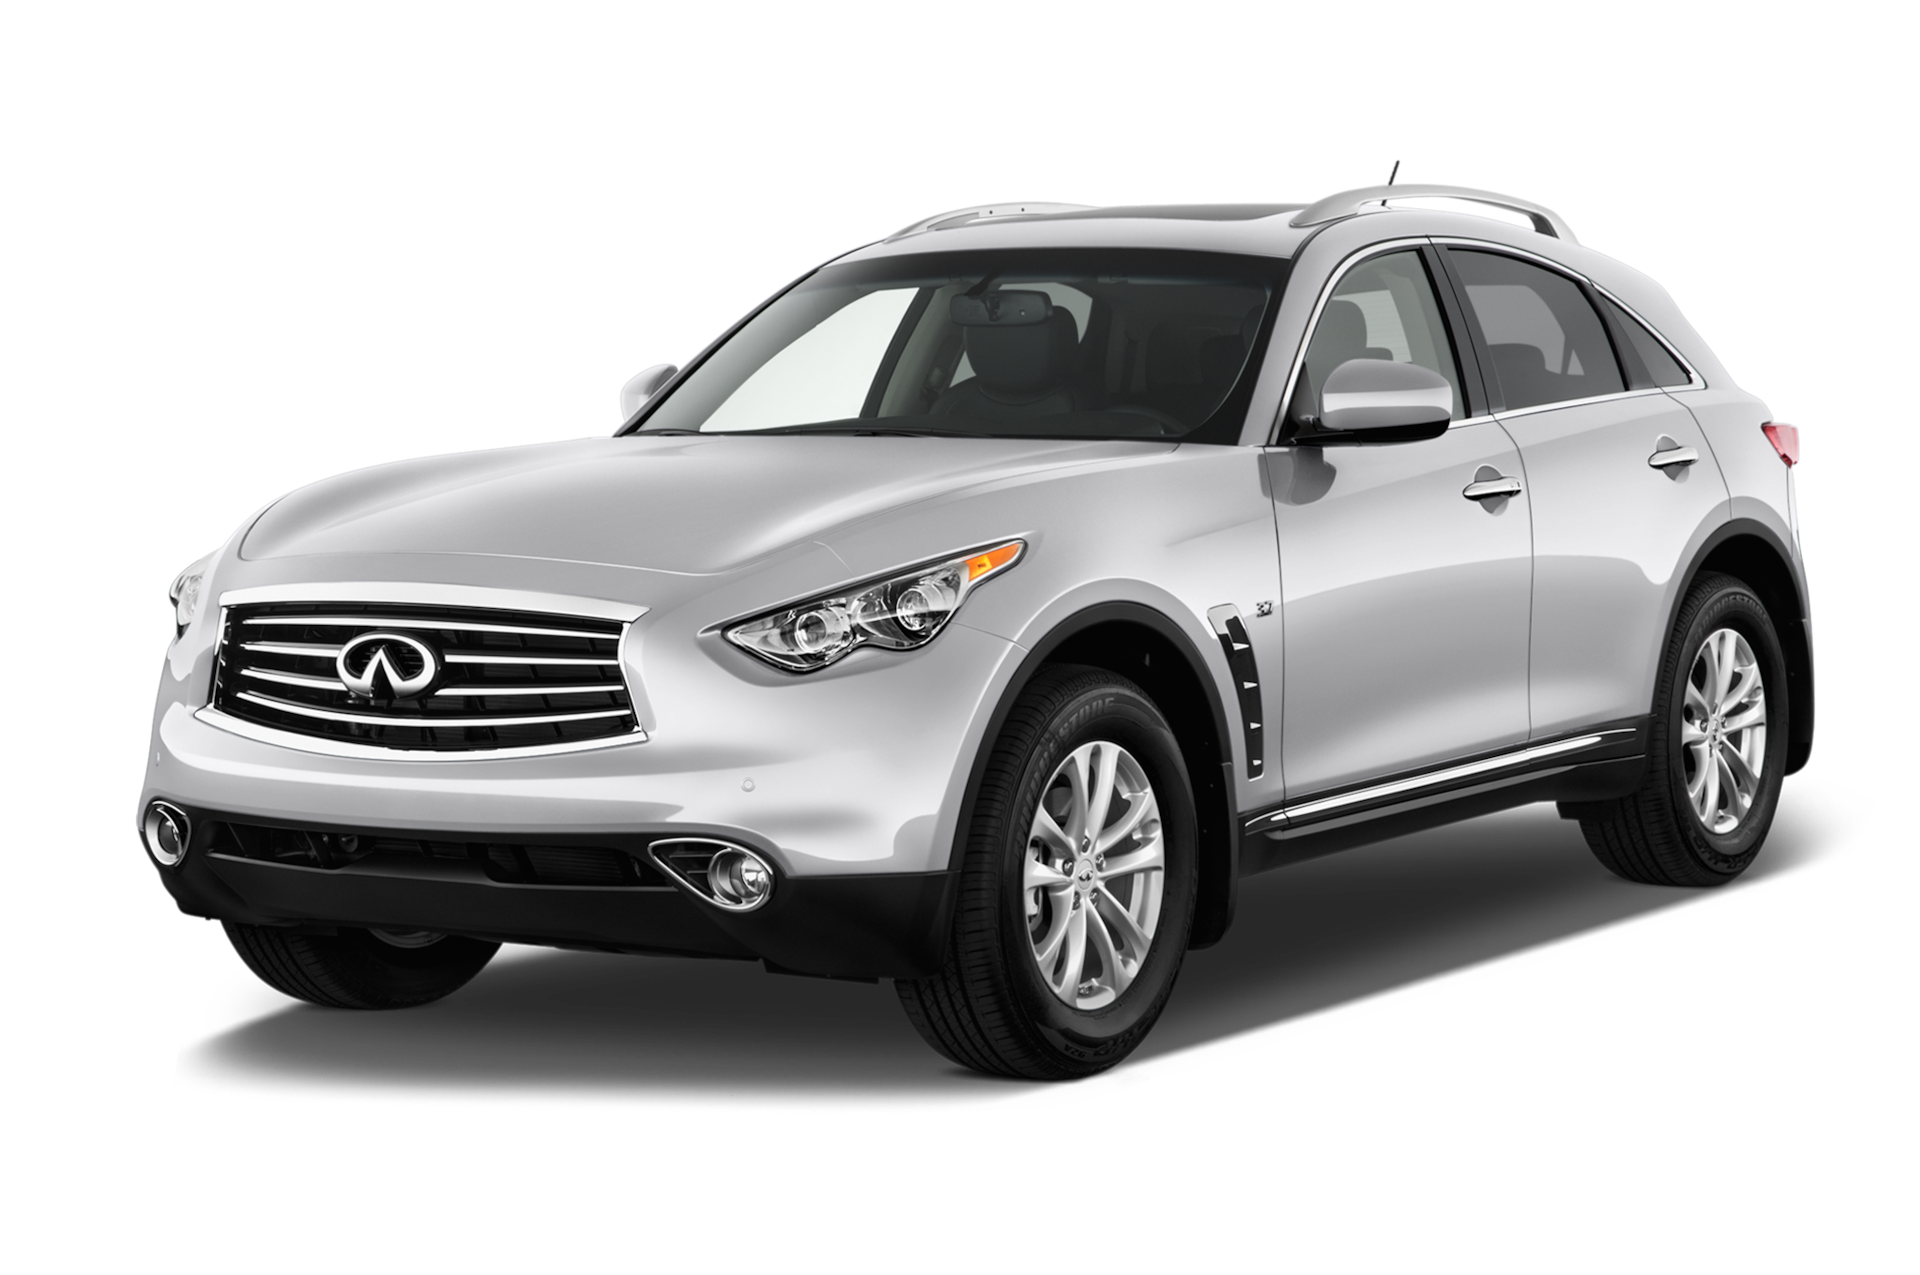 2015 Infiniti QX70 Prices, Reviews, and Photos - MotorTrend